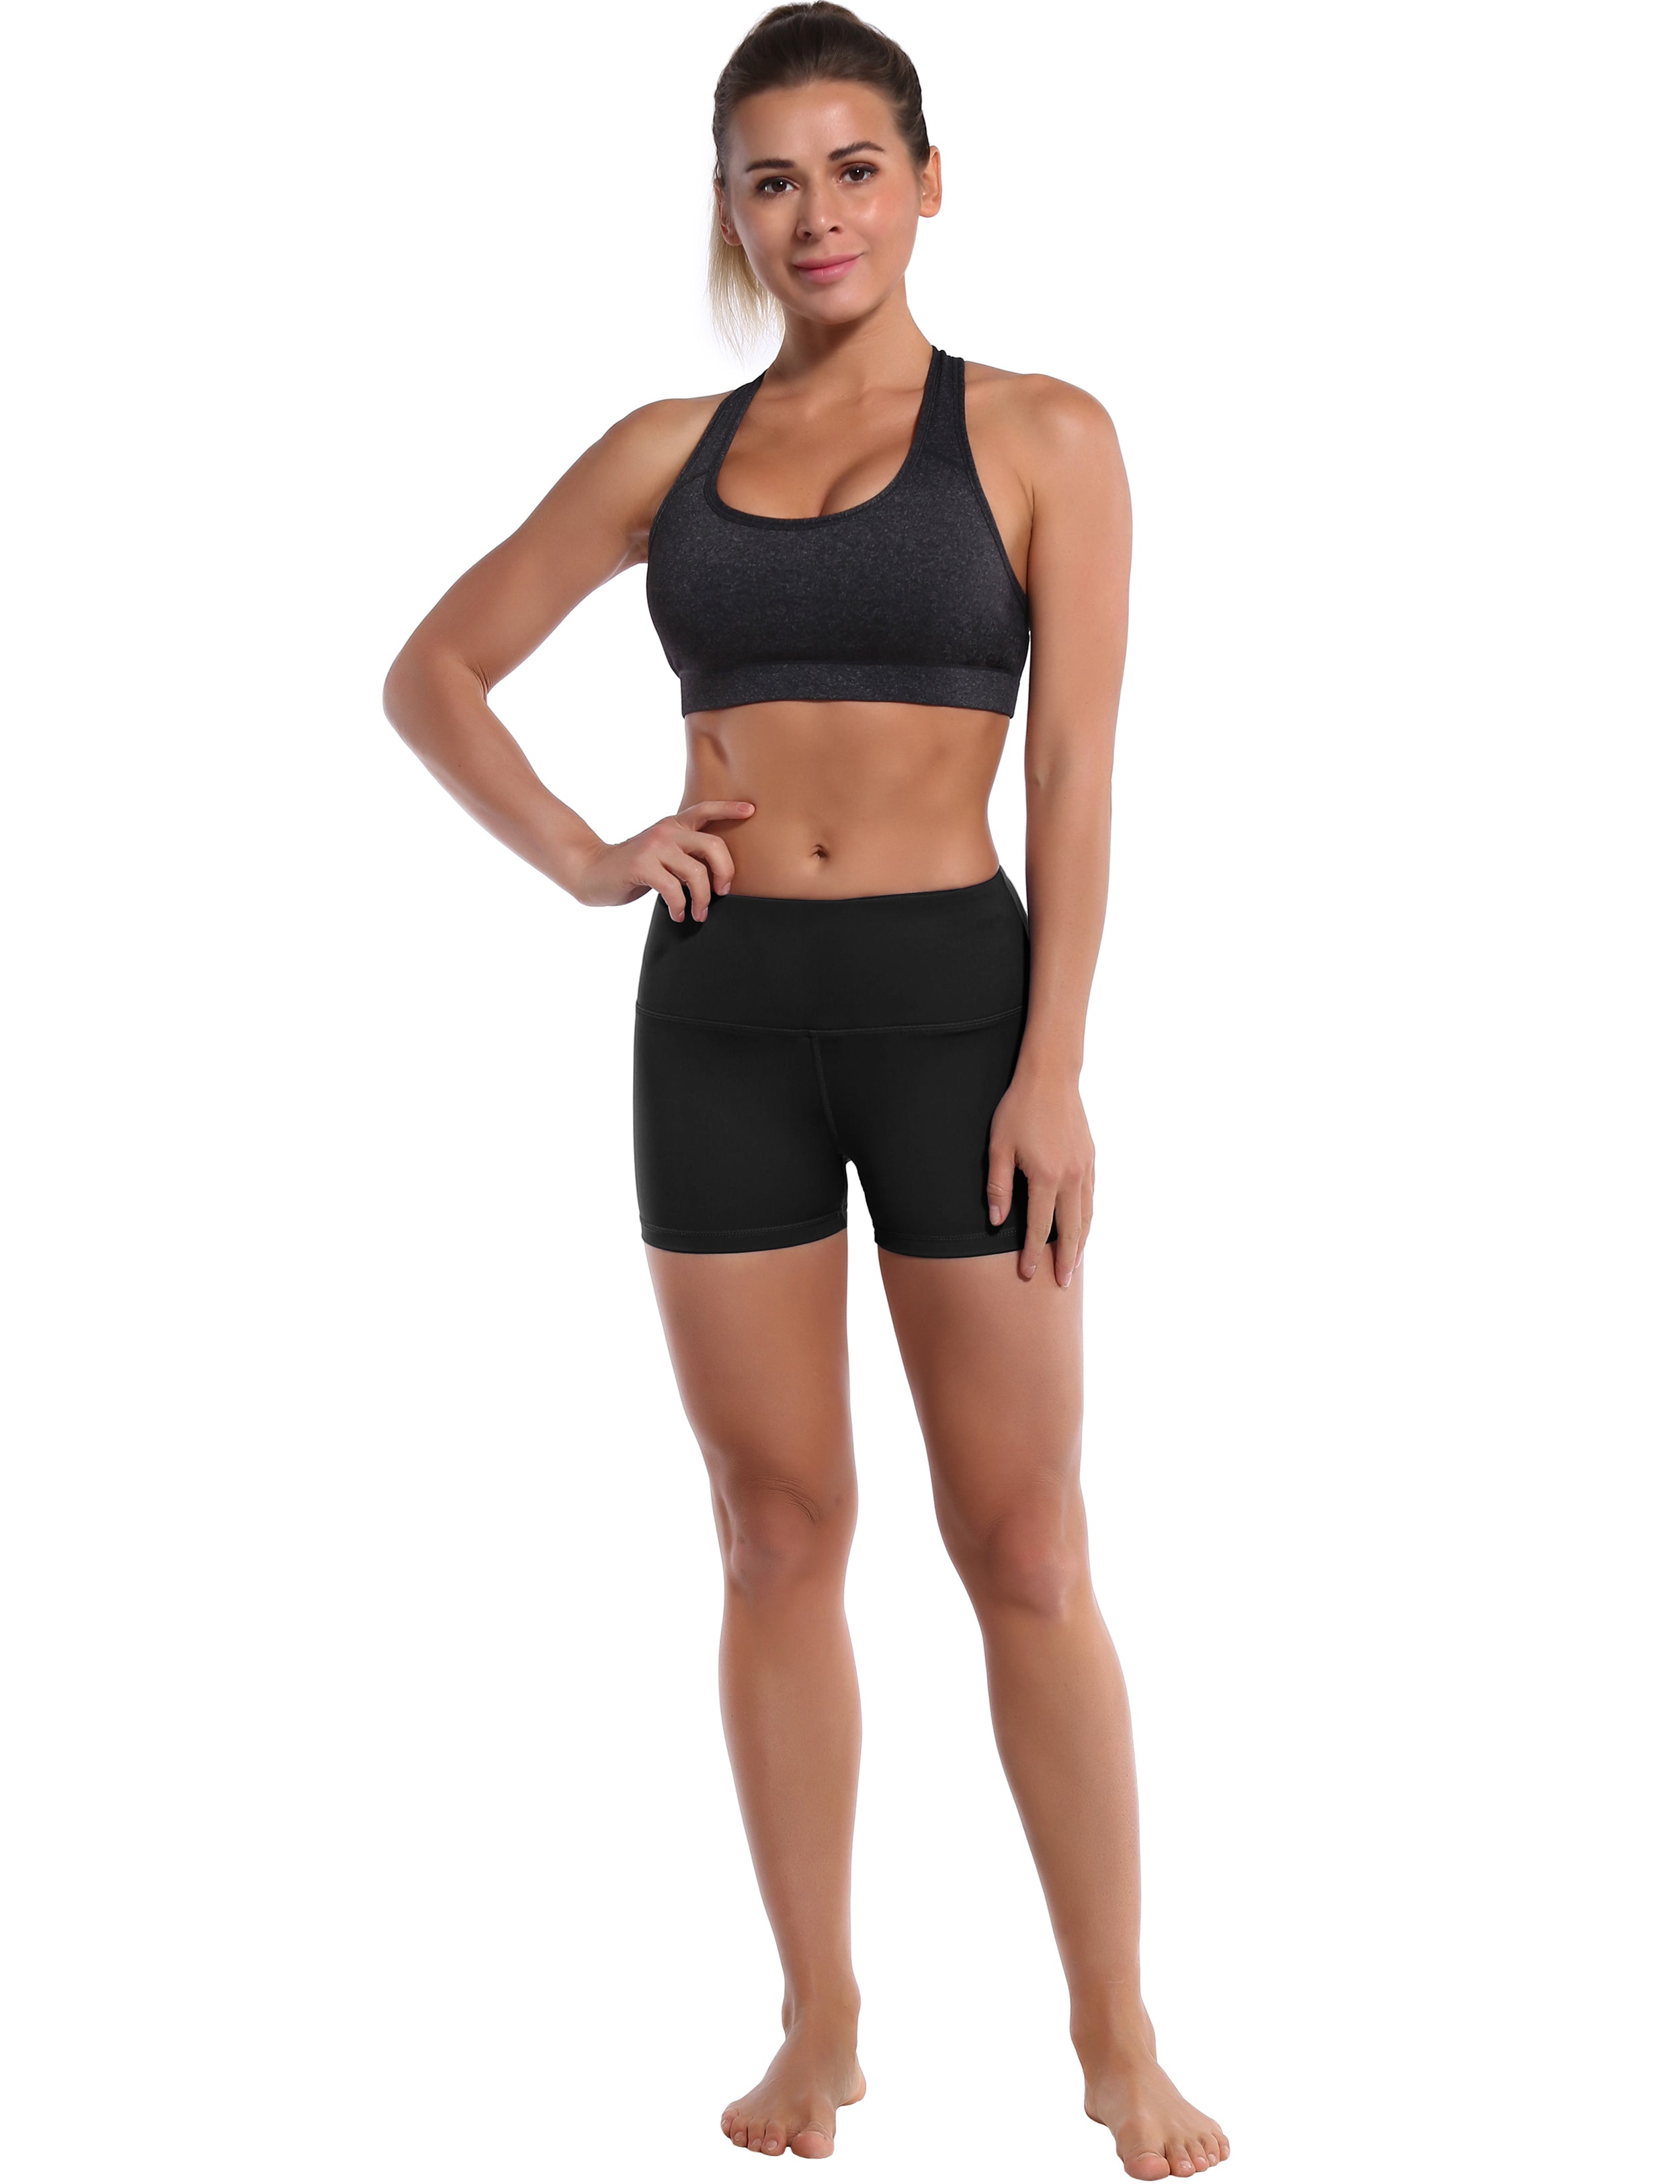 2.5" Jogging Shorts black Softest-ever fabric High elasticity High density 4-way stretch Fabric doesn't attract lint easily No see-through Moisture-wicking Machine wash 75% Nylon, 25% Spandex